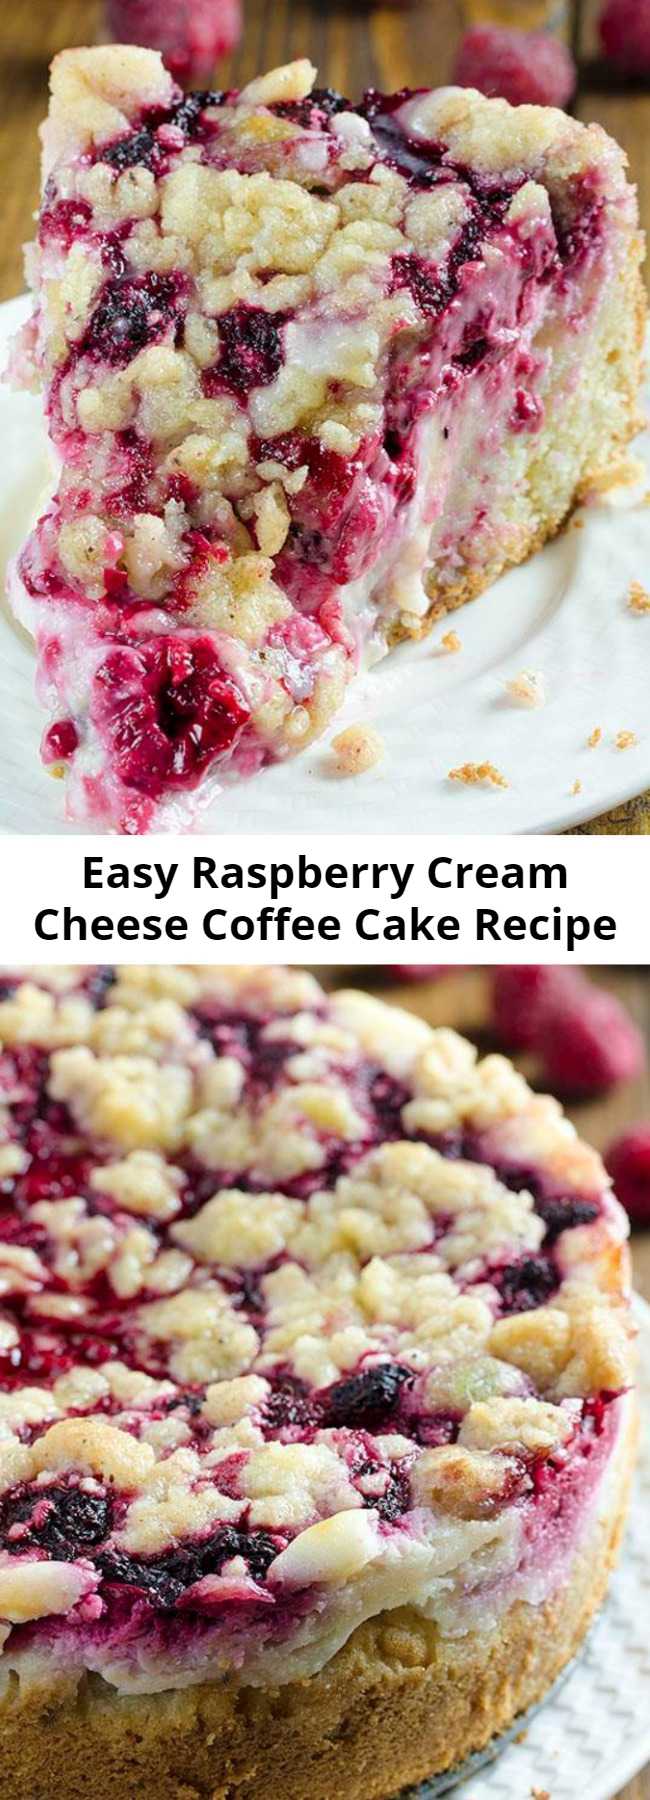 Easy Raspberry Cream Cheese Coffee Cake Recipe - Moist and buttery cake, creamy cheesecake filling, juicy raspberries and crunchy streusel topping. This fruit-filled coffee cake is tangy, creamy, and a light dessert that is perfect for company!